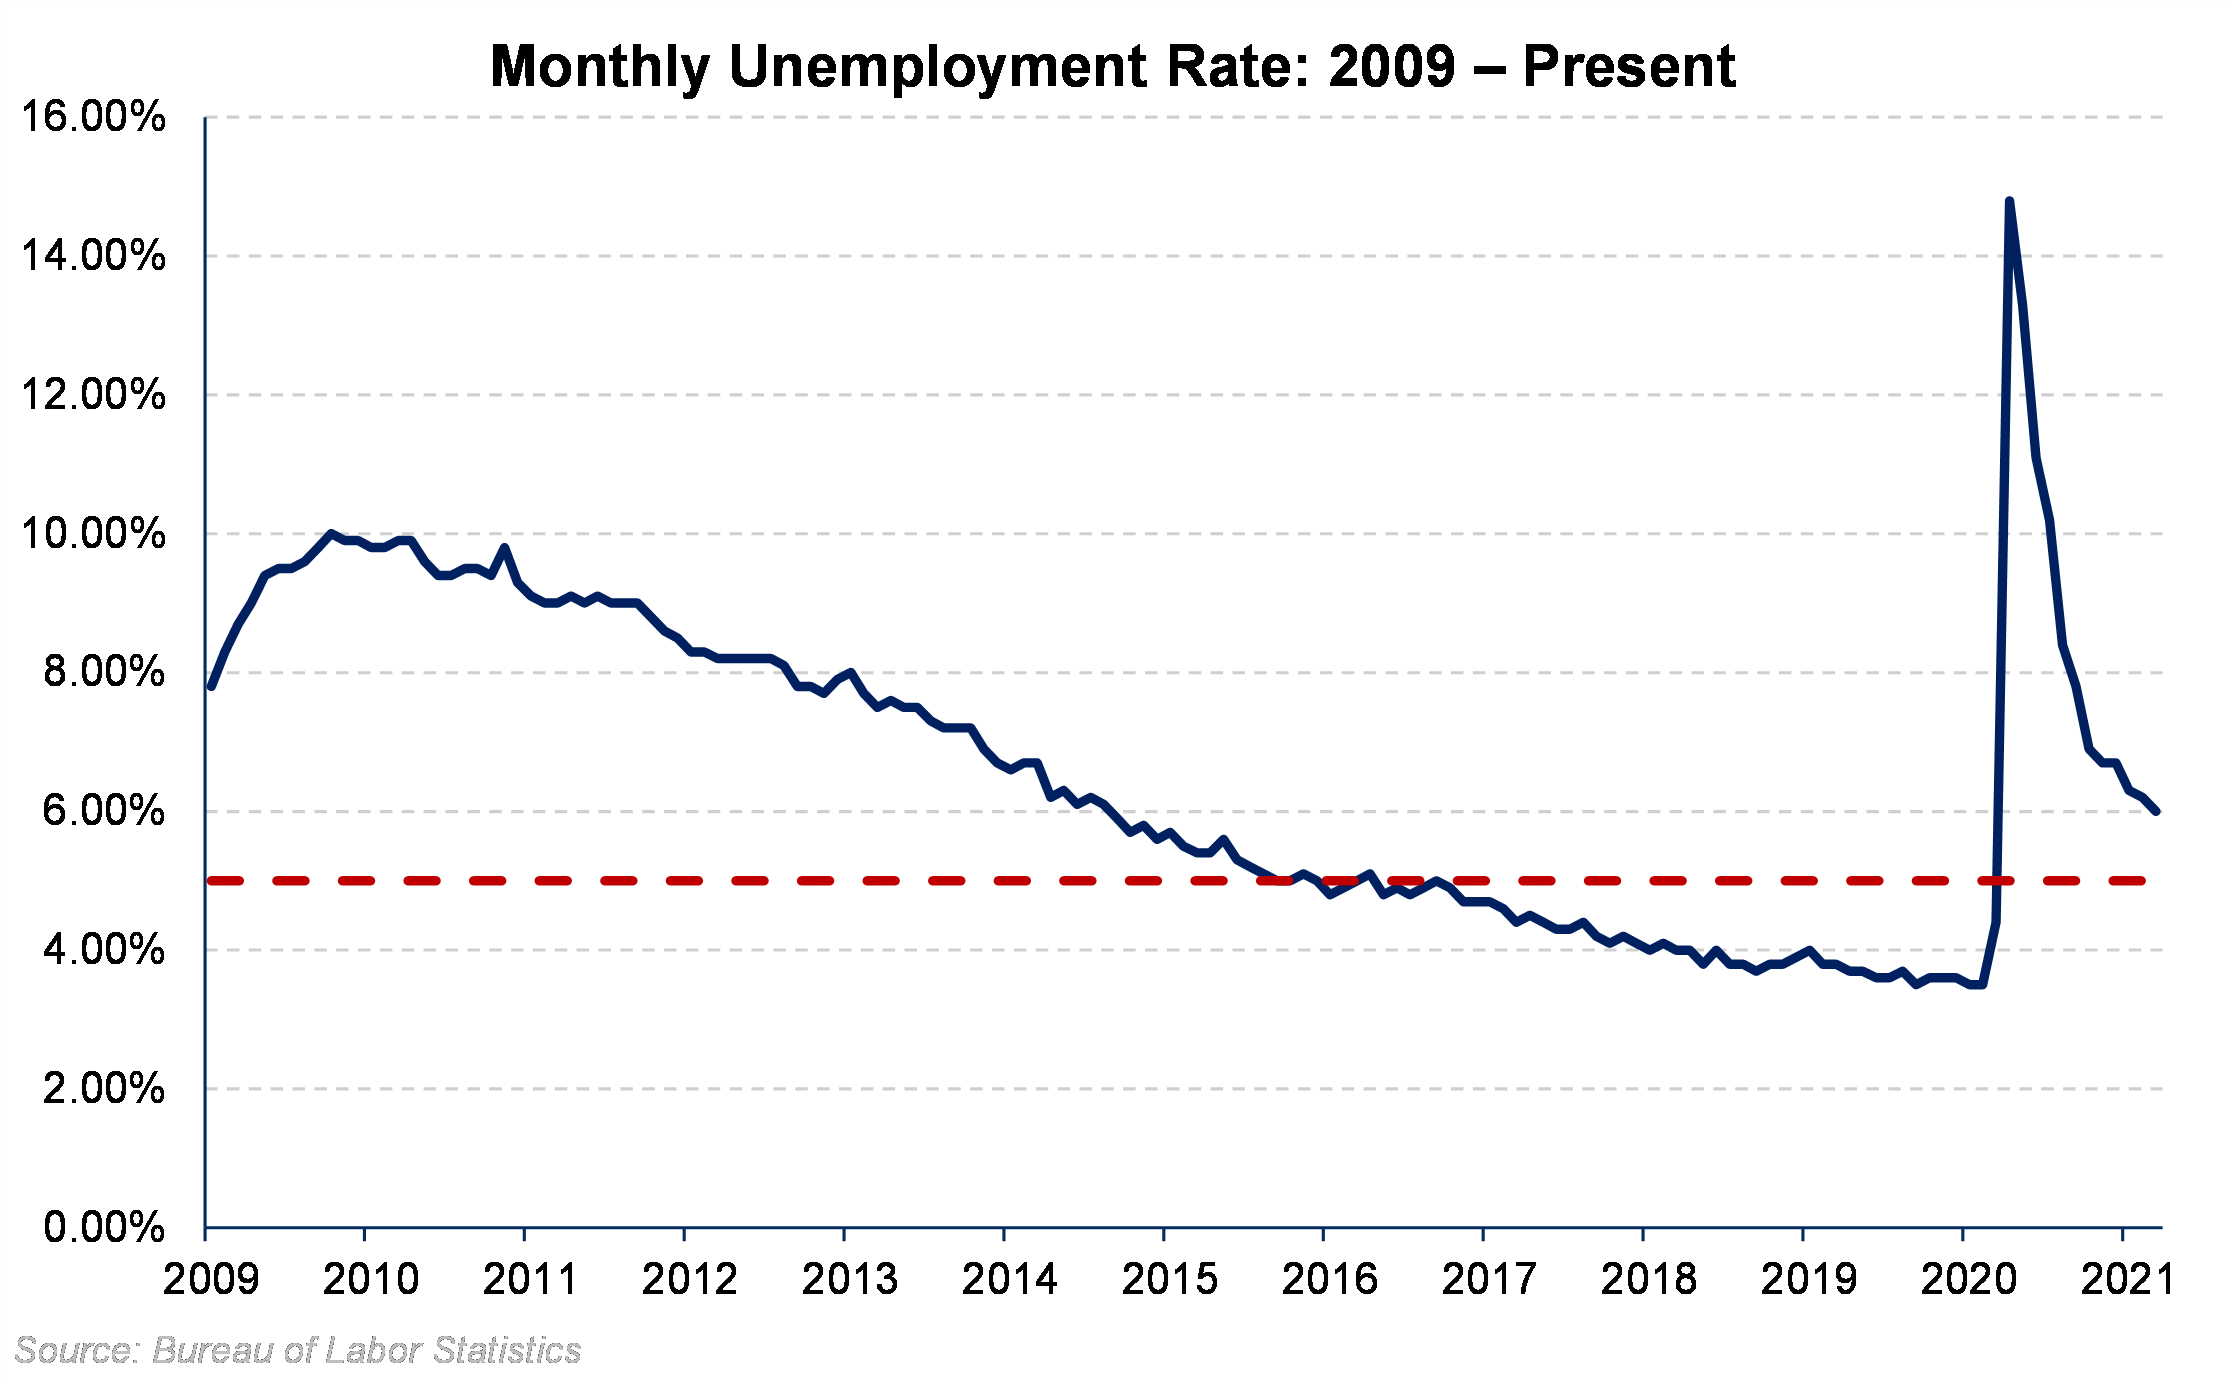 Monthly Unemployment Rate